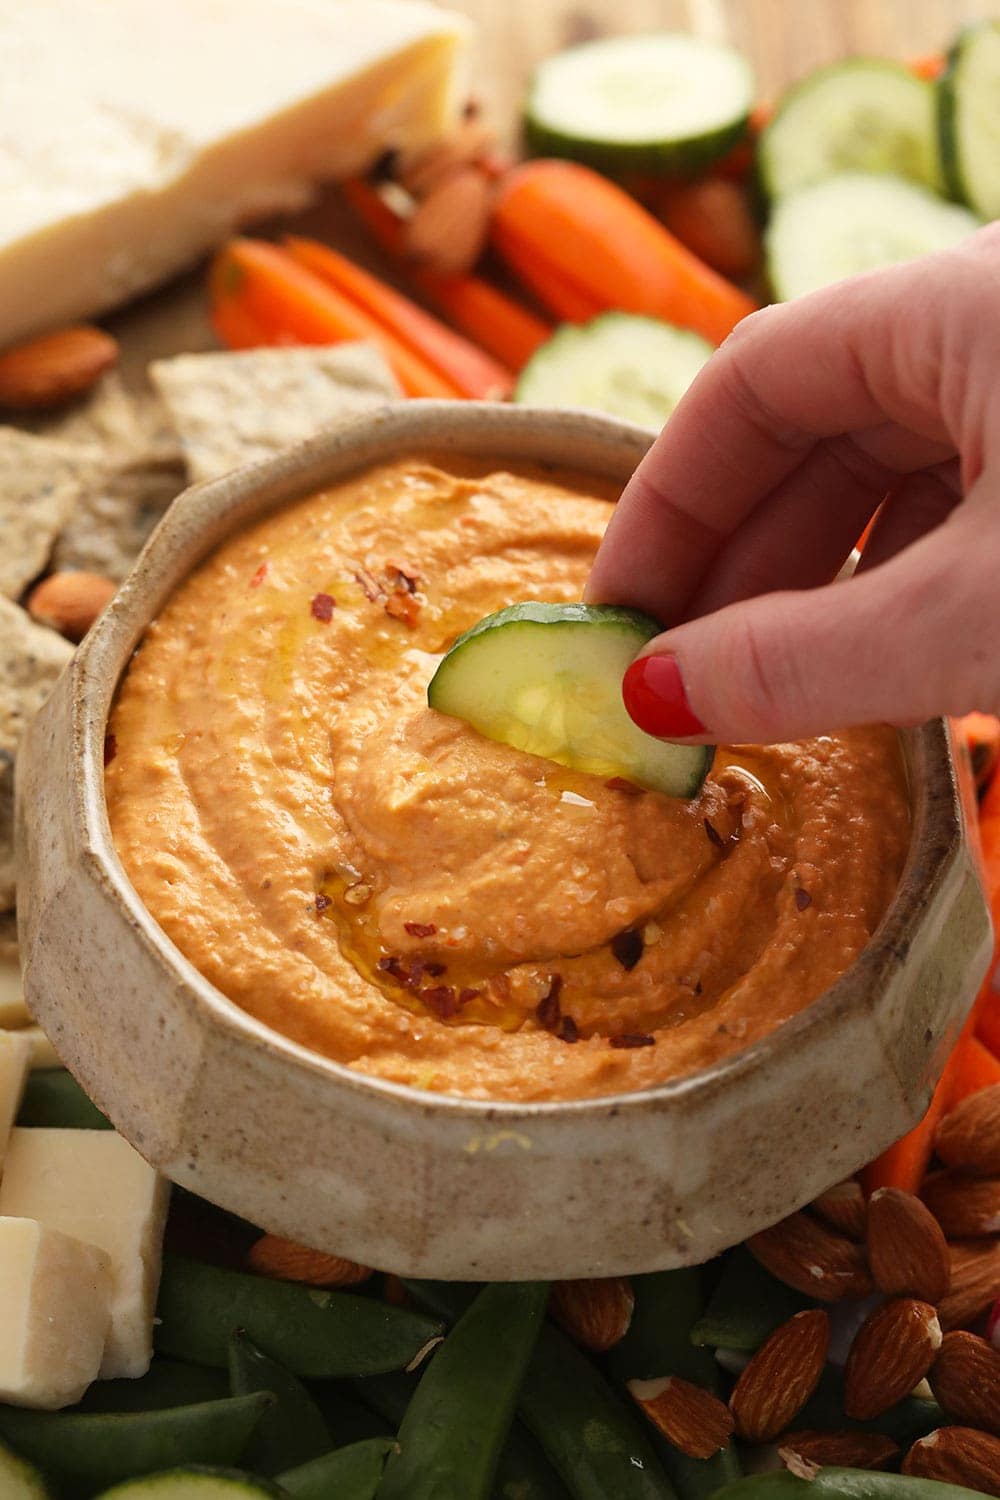 roasted red pepper hummus with a cucumber being dipped in it